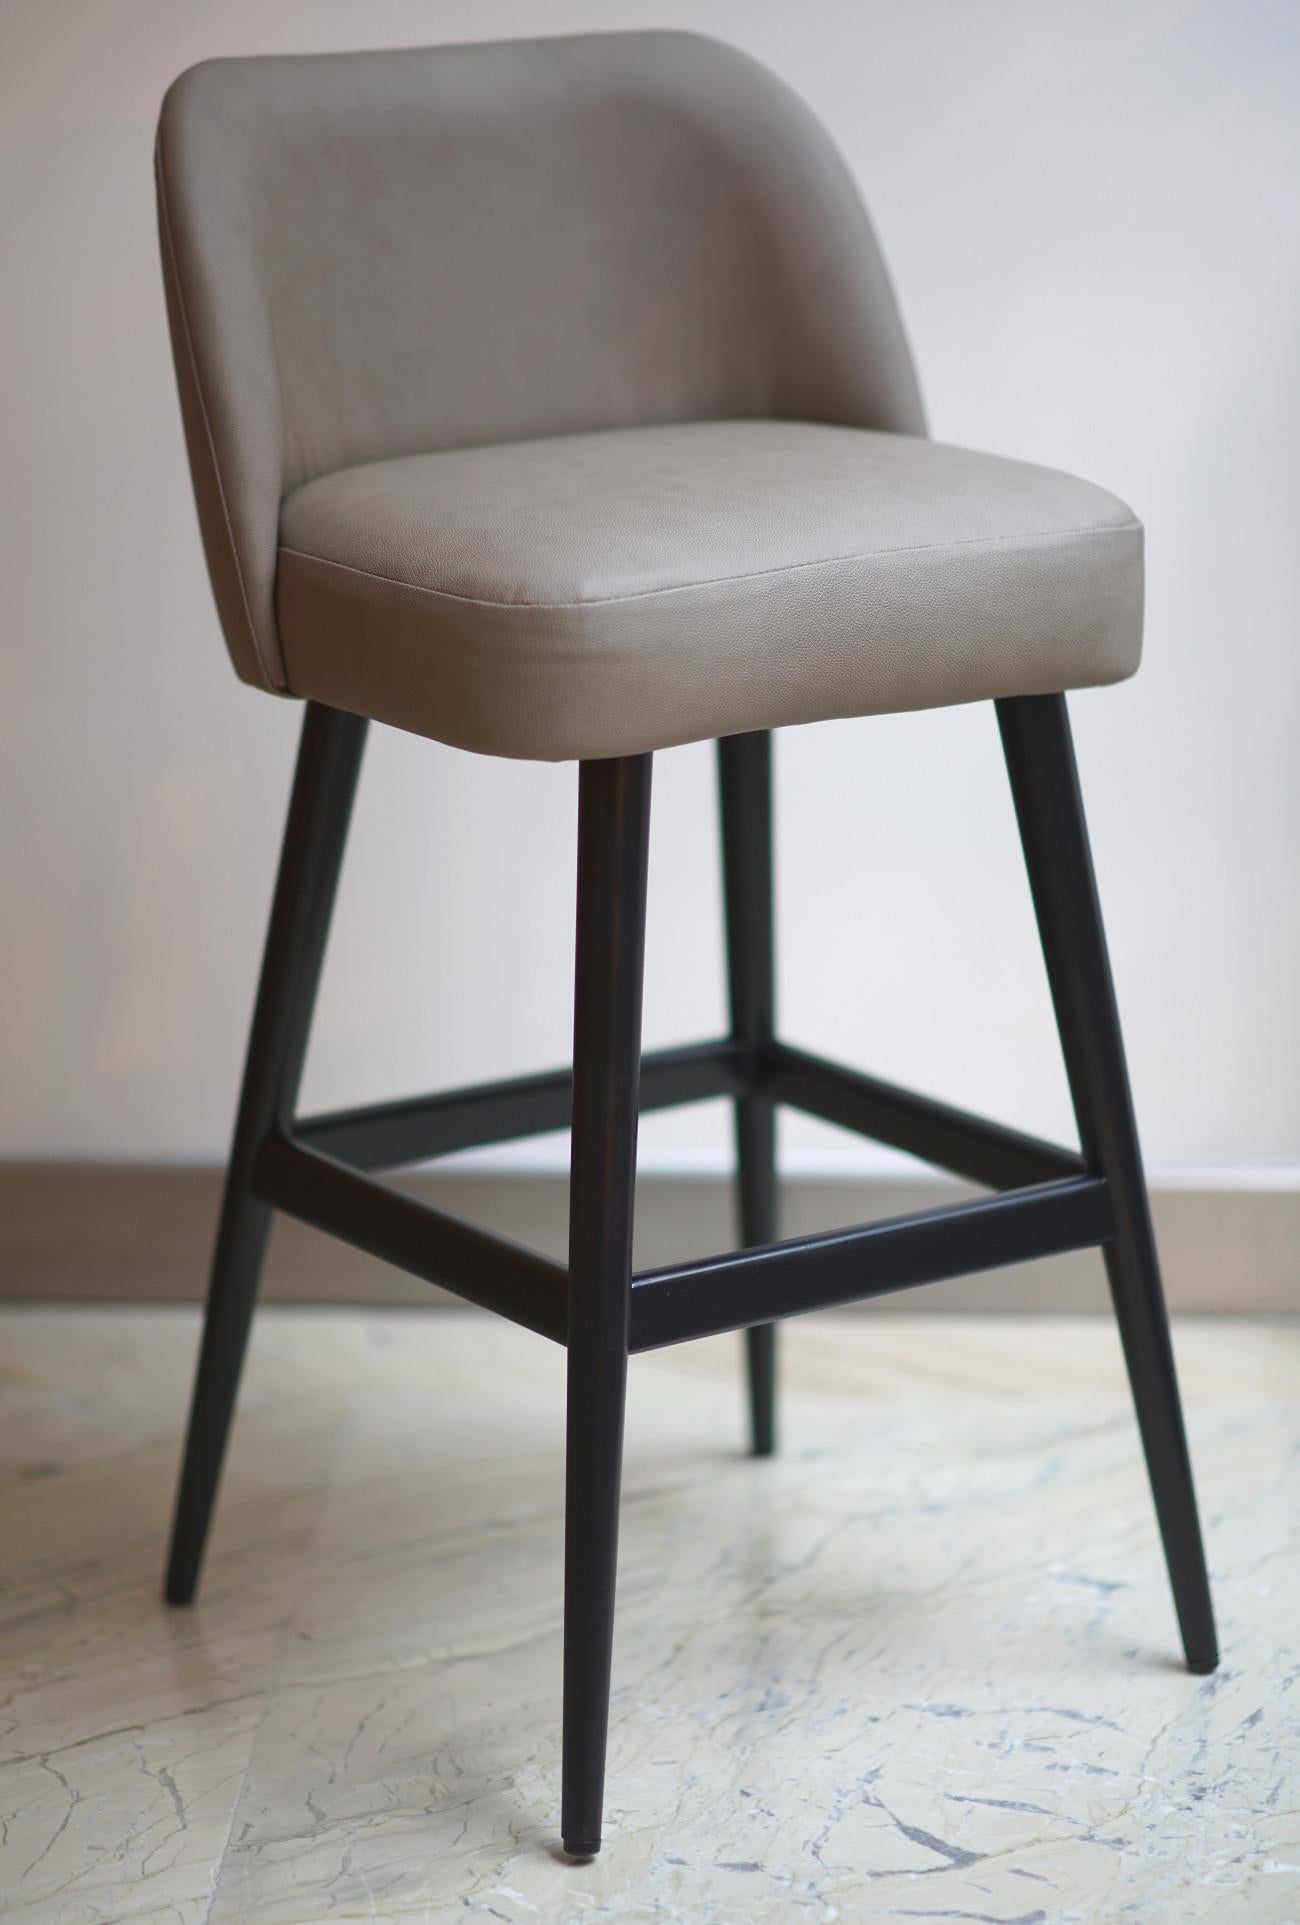 Helsinki collection. Helsinki counter stool: simple, elegant, comfortable. Available in oak and walnut base or in custom materials, may be upholstered with variety of fabrics and colors. Natural leather and Vegan Leather option available. Also